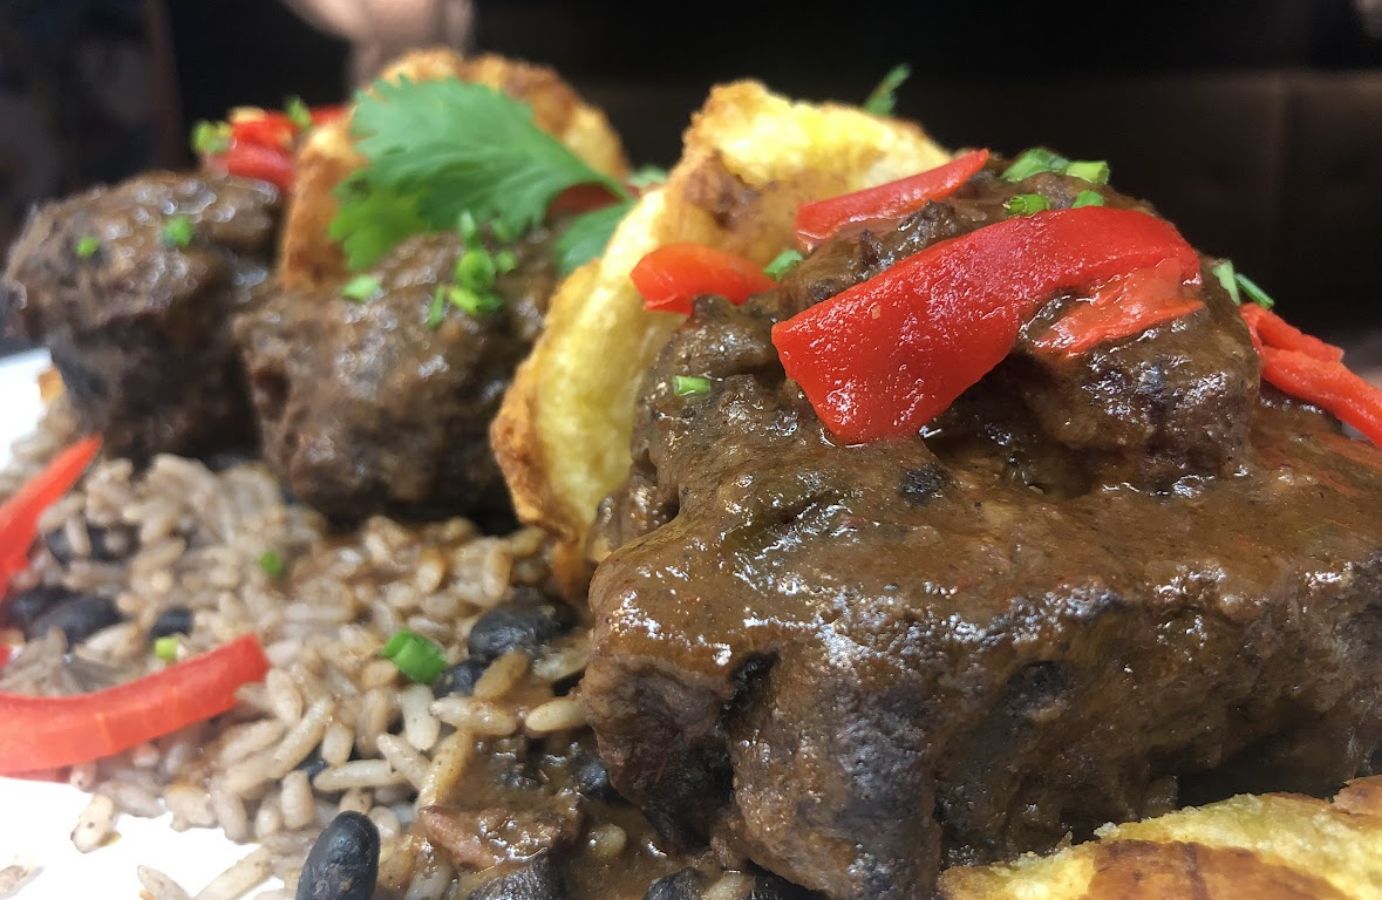 Closeup of a Caribbean-style braised oxtails dish